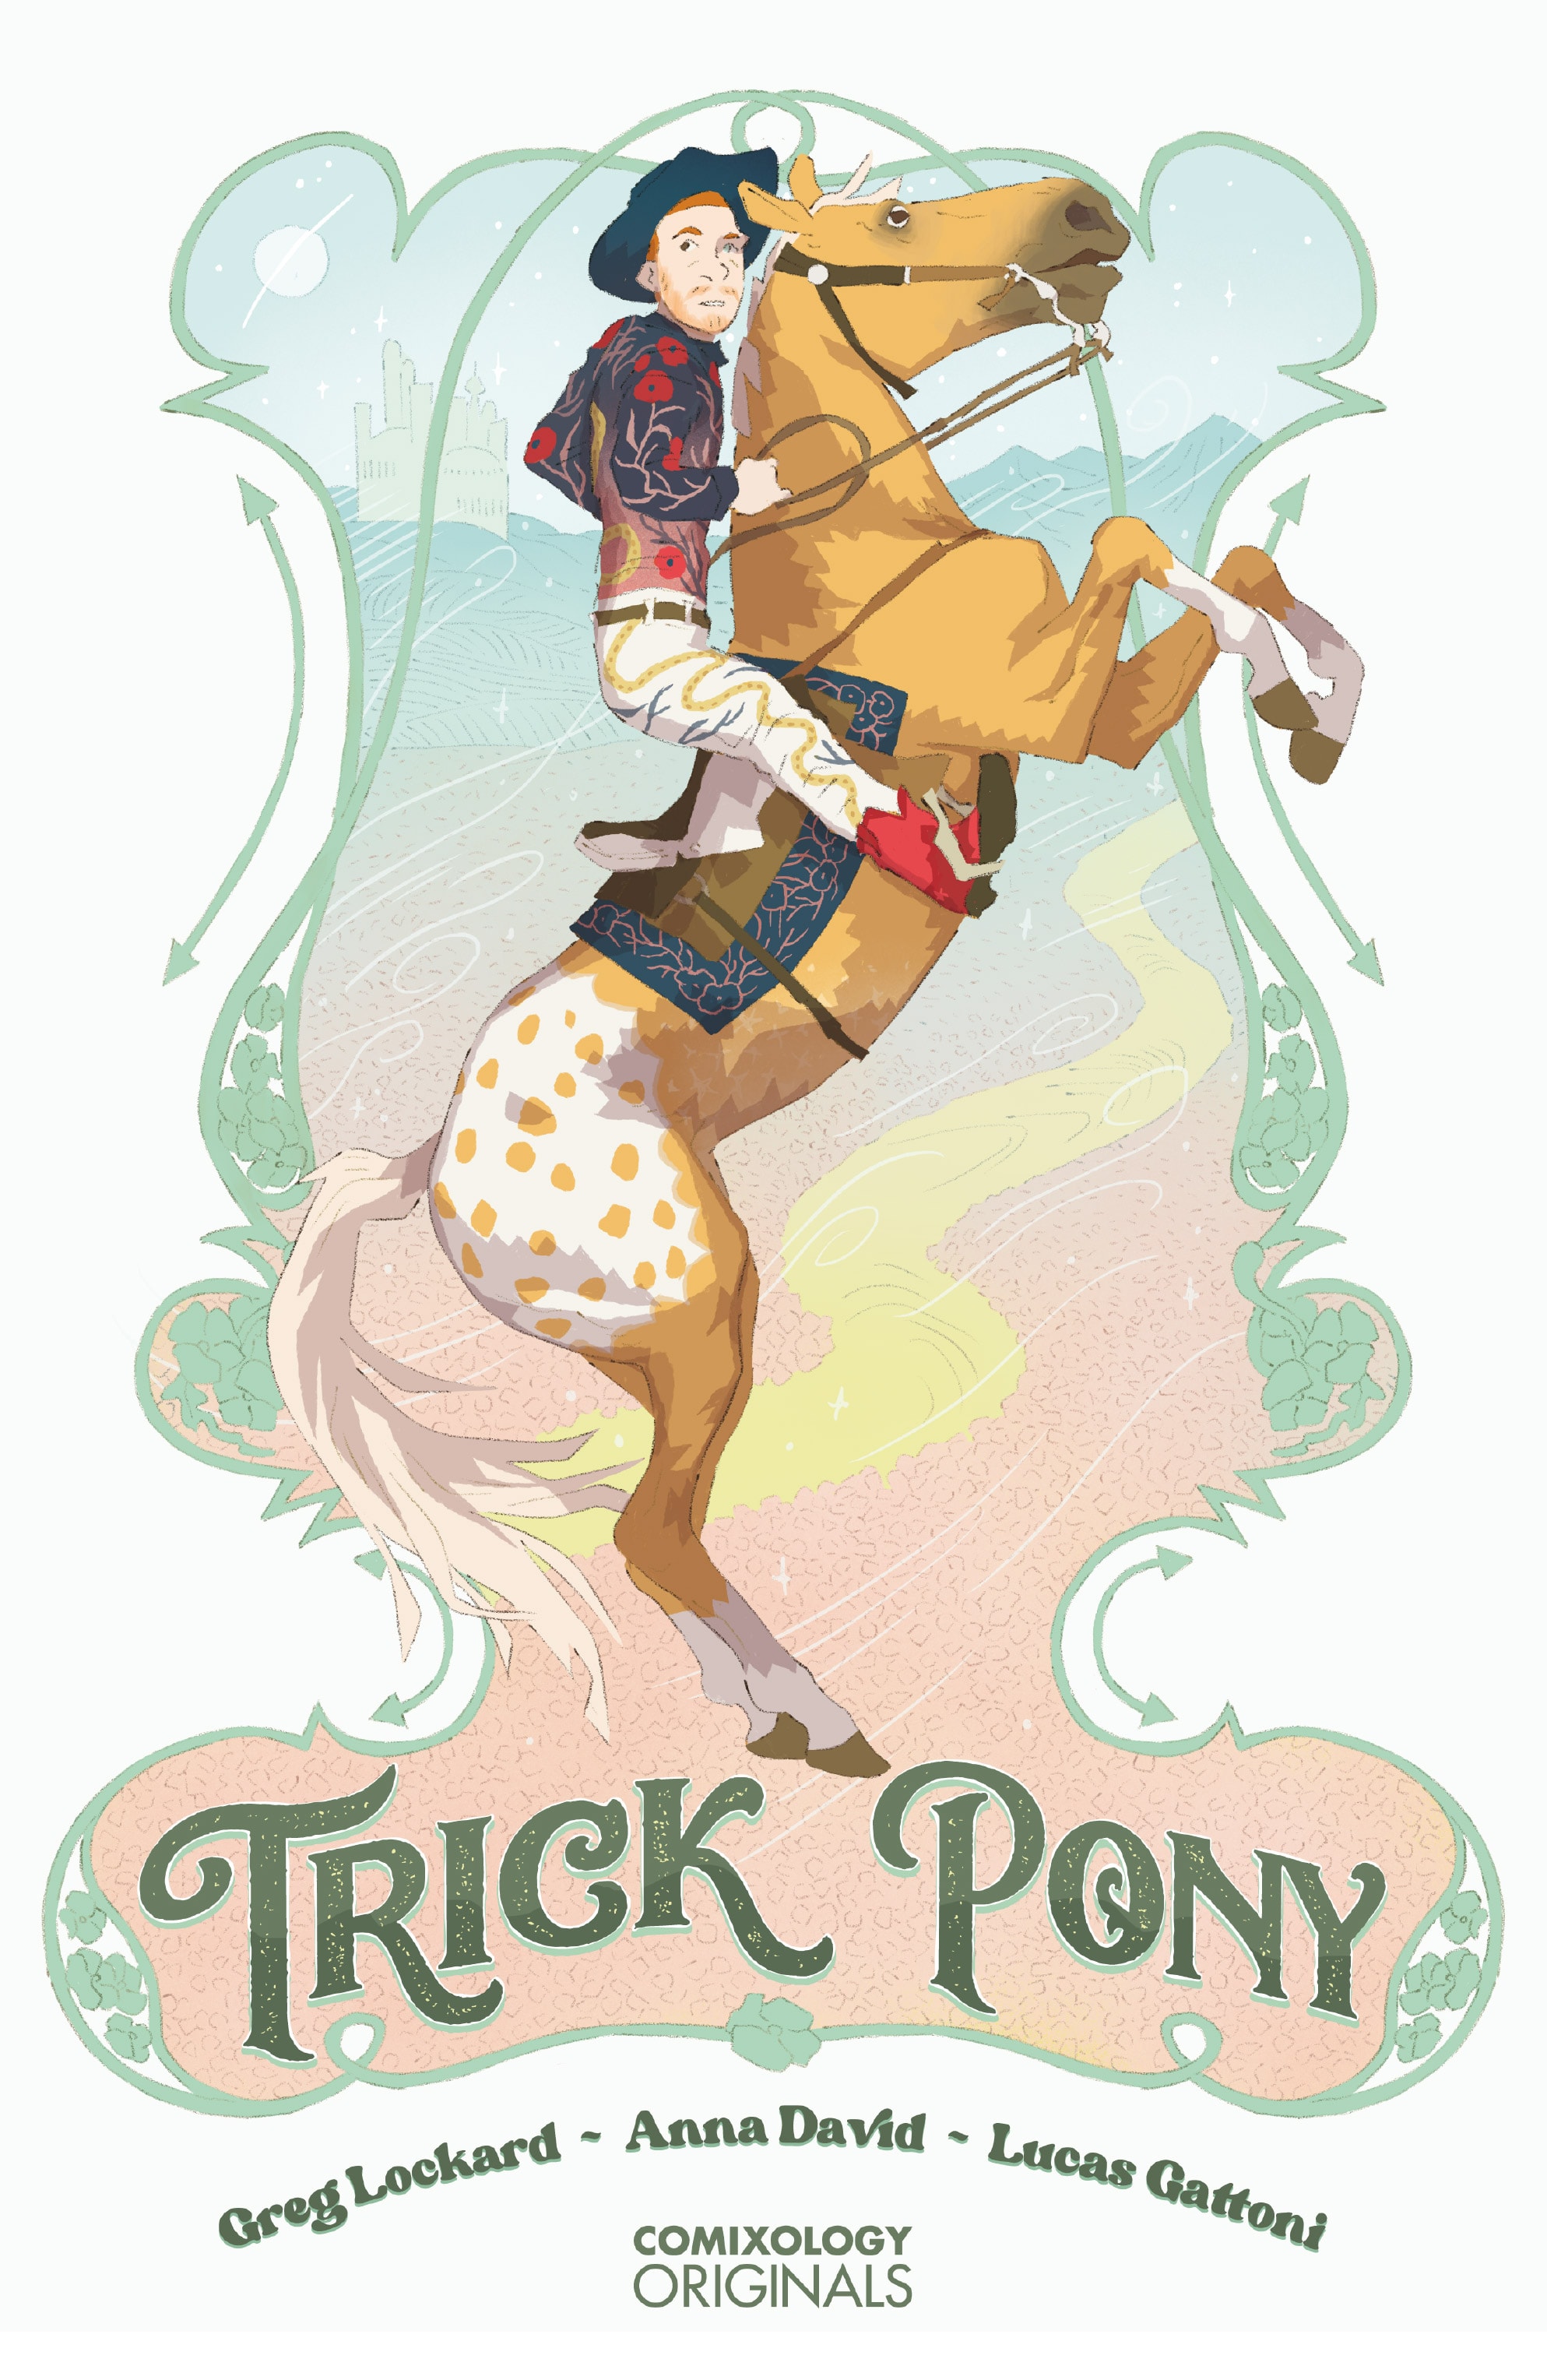  ‘Trick Pony’ offers a soulful take on the gay cowboy archetype